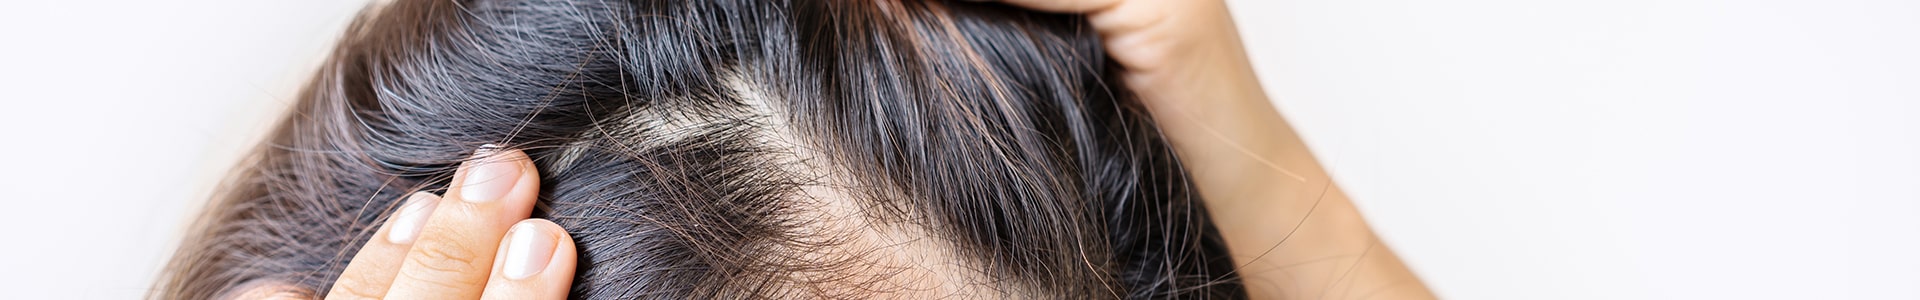 Medical therapy treatments for hair loss